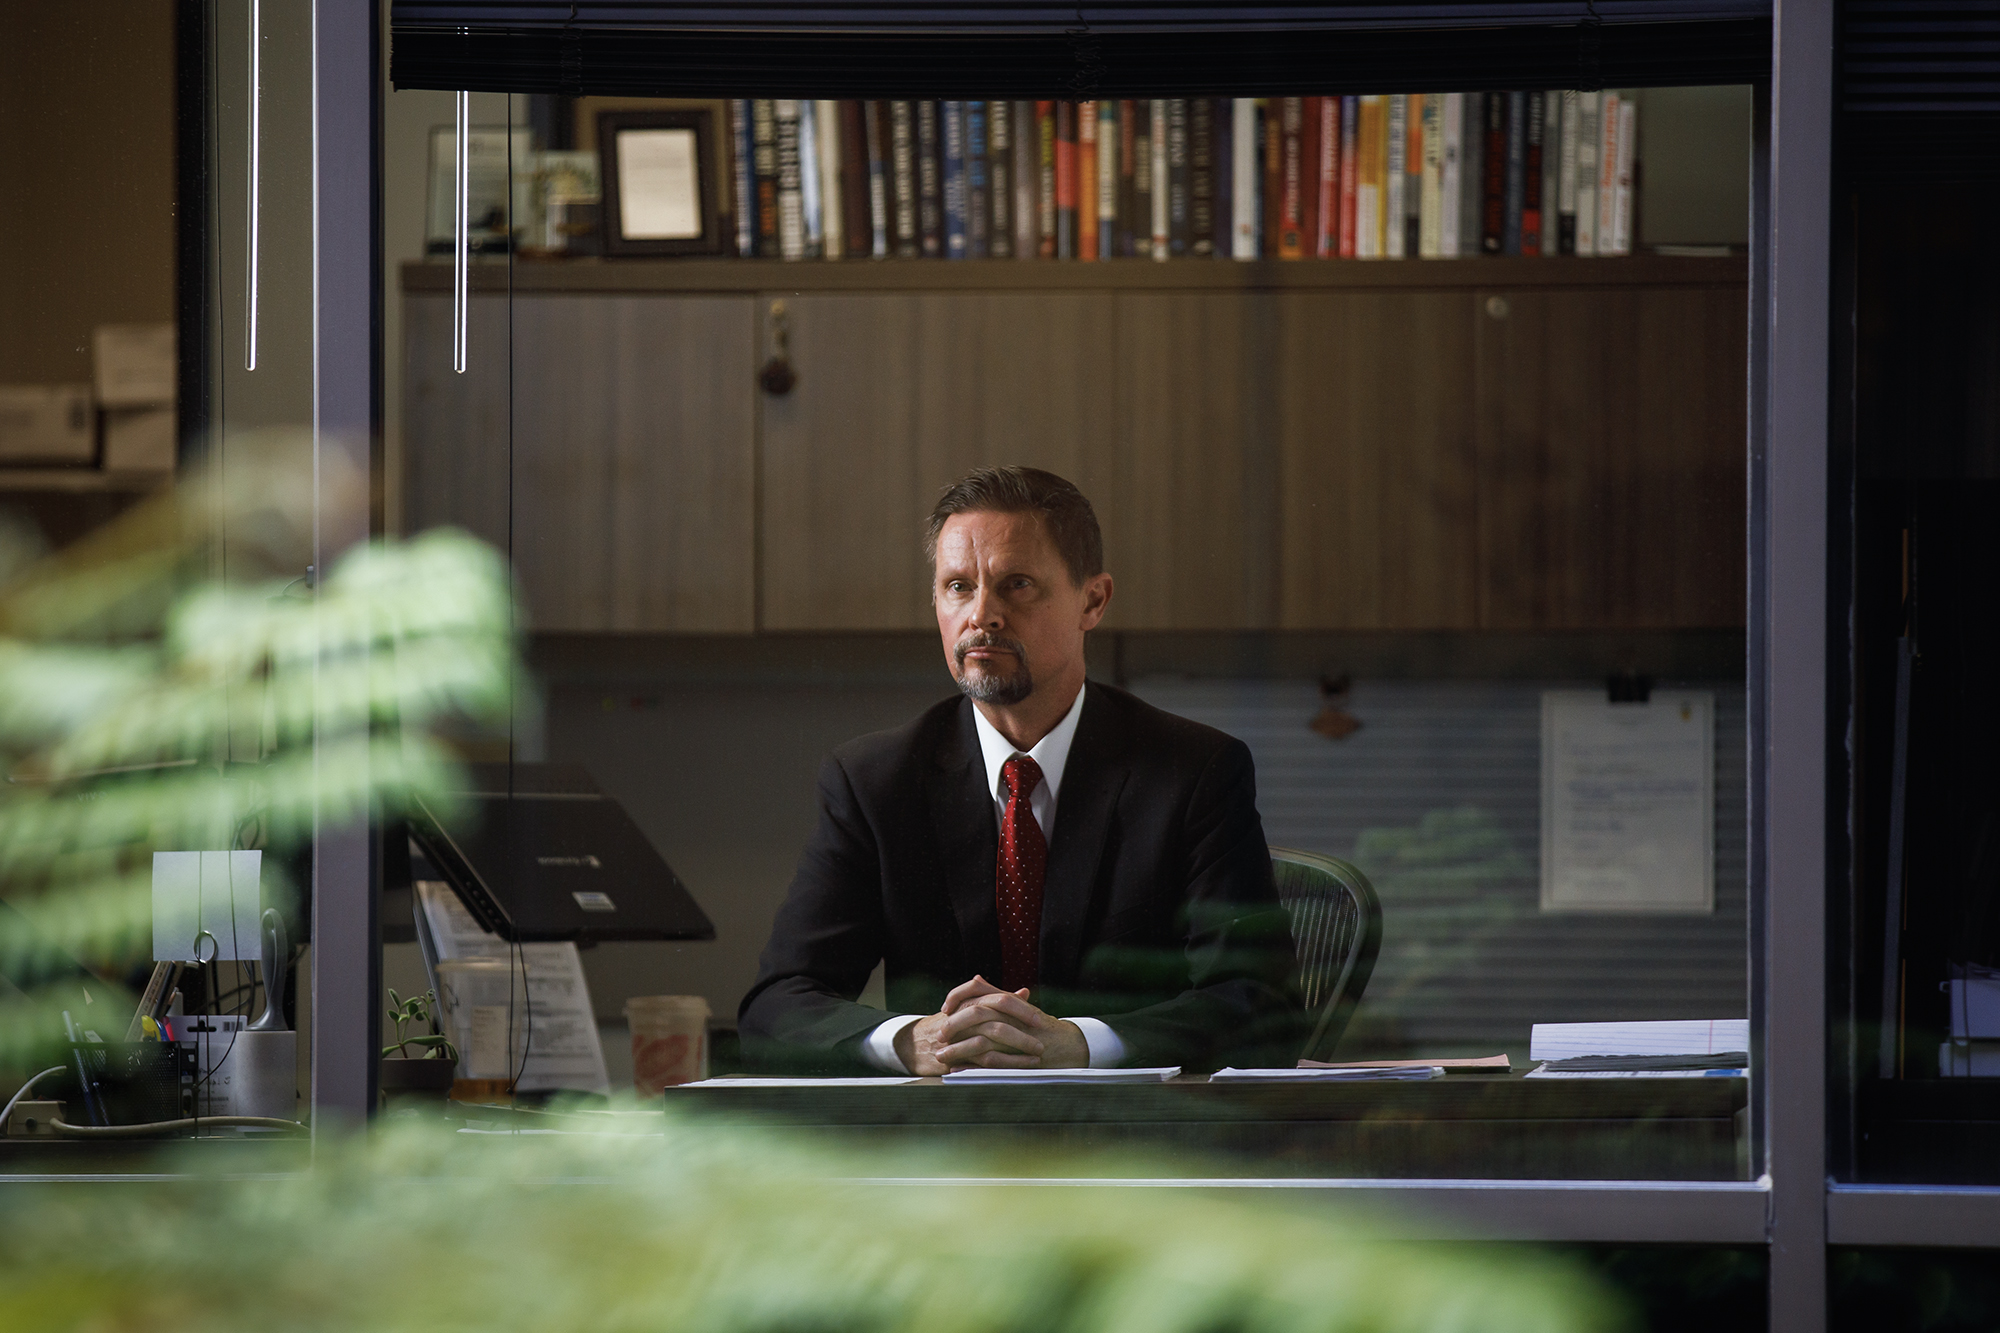 Paul Parker, executive officer of the Citizens’ Law Enforcement Review Board, inside his office in San Diego on Oct. 17, 2023. Photo by Kristian Carreon for CalMatters